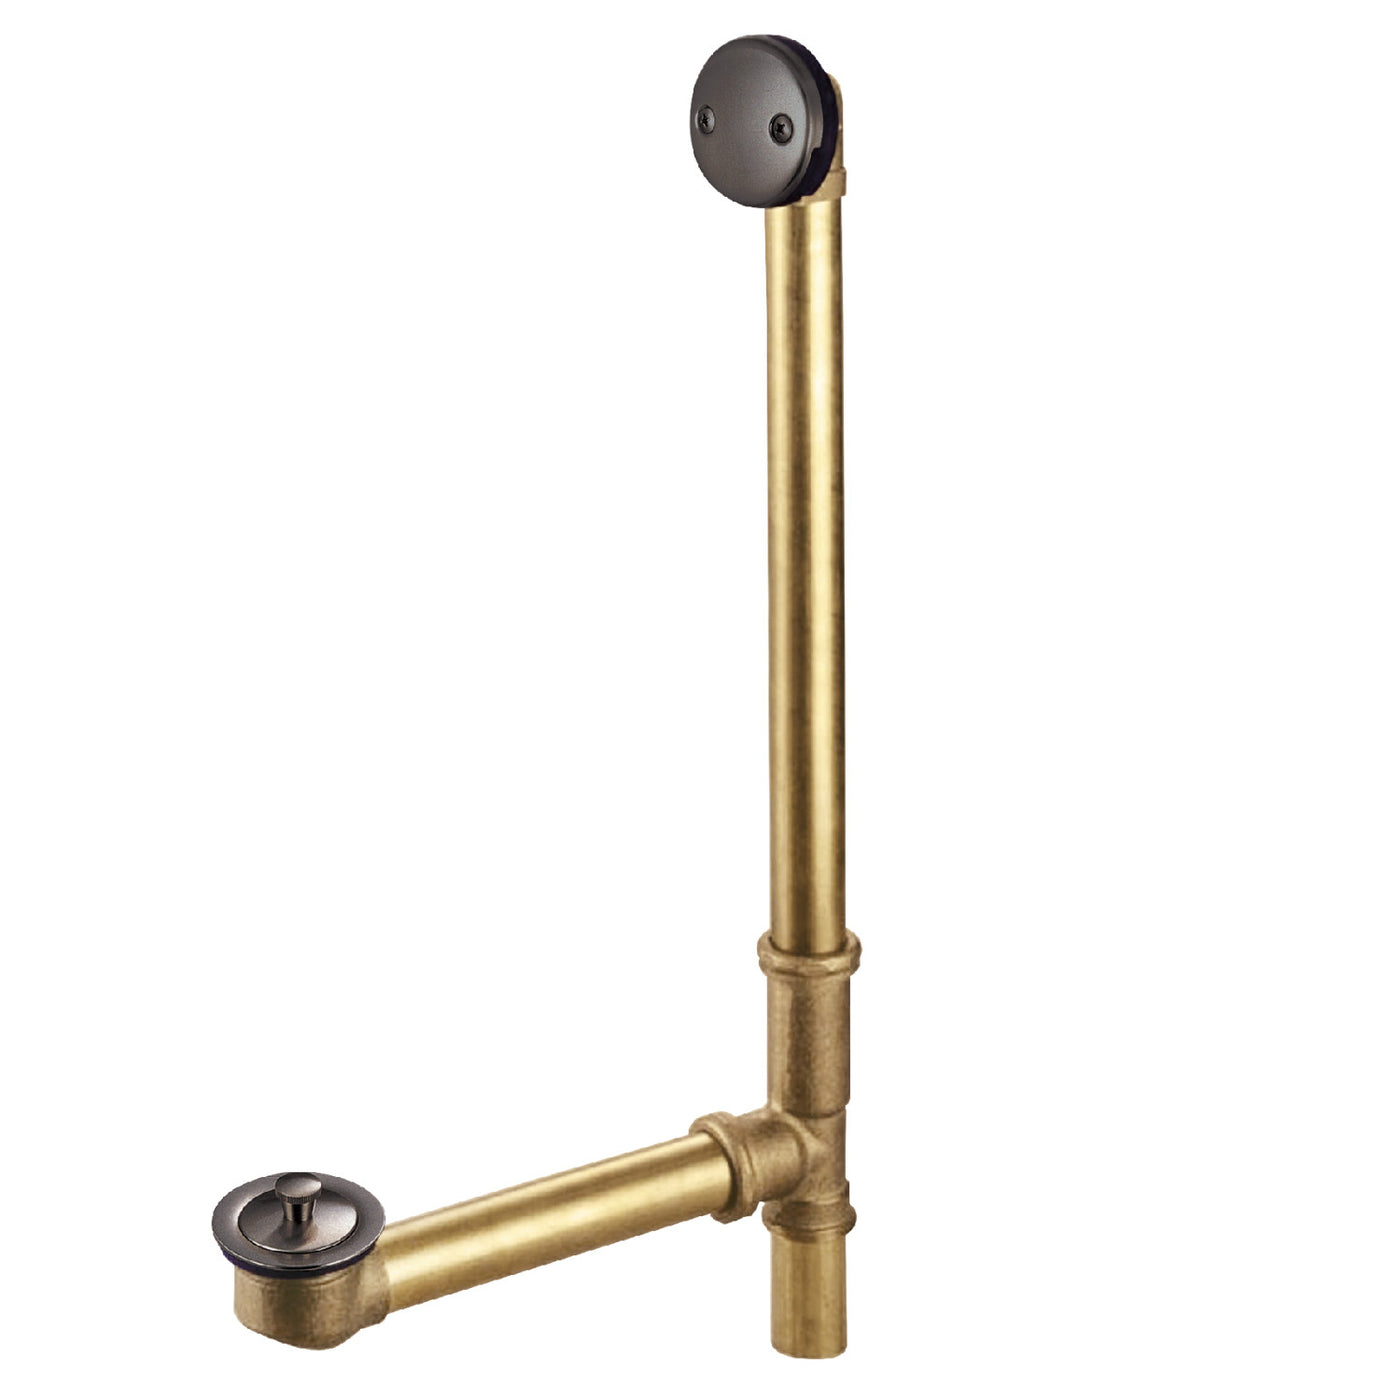 Elements of Design EDLL3185 23-Inch Lift and Turn Tub Waste and Overflow, 20 Gauge, Oil Rubbed Bronze